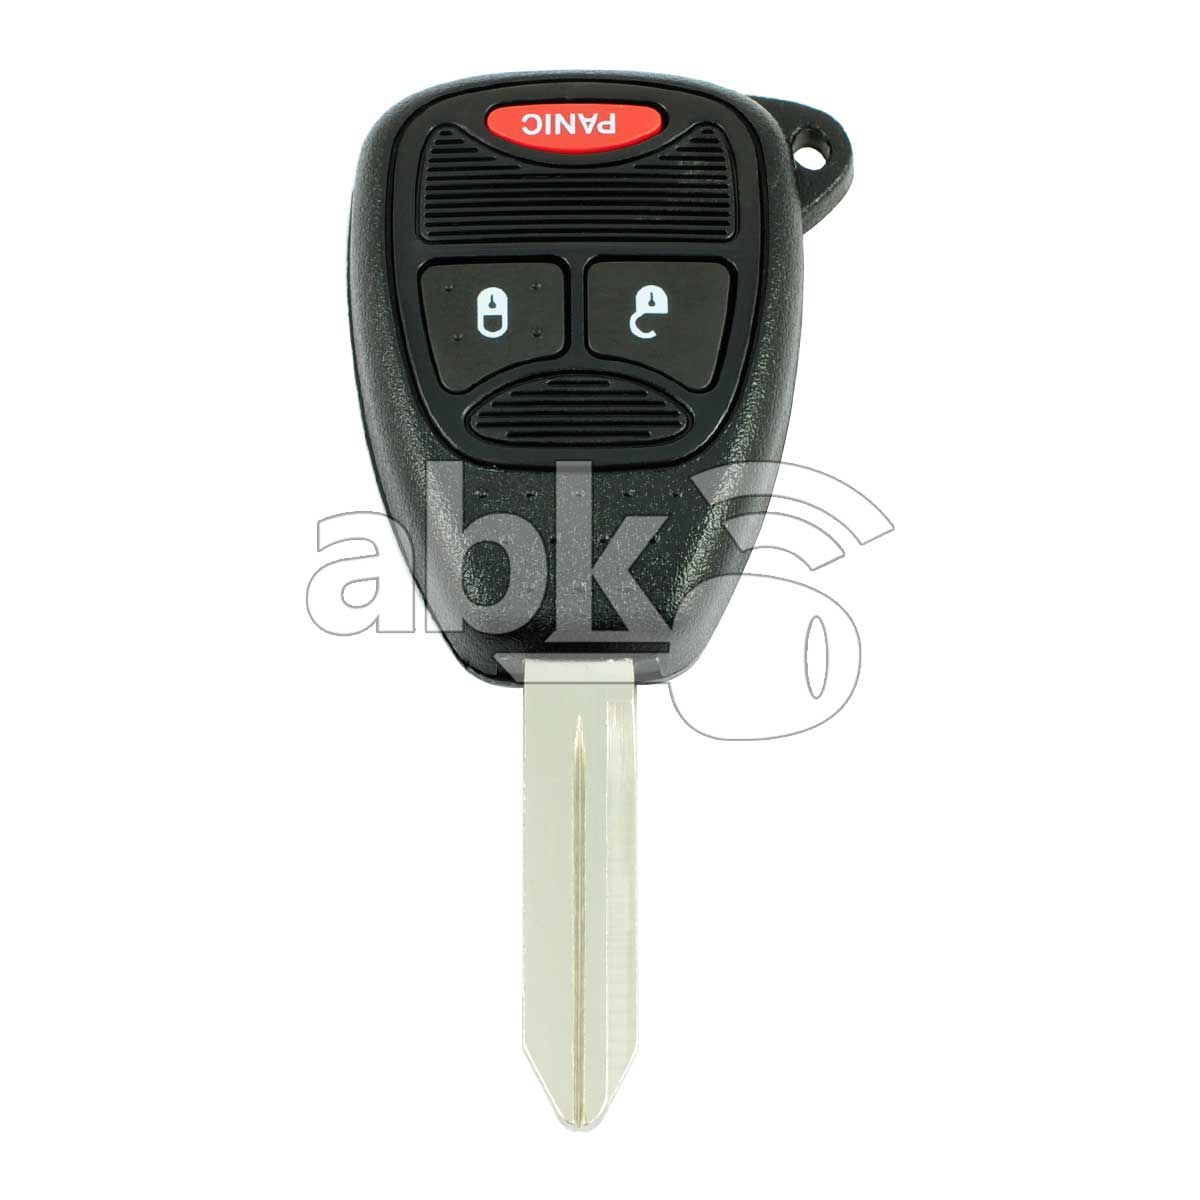 Genuine Jeep Compass Patriot 2007+ Key Head Remote 3Buttons OHT692427AA 315MHz CY22 68000603AA - 